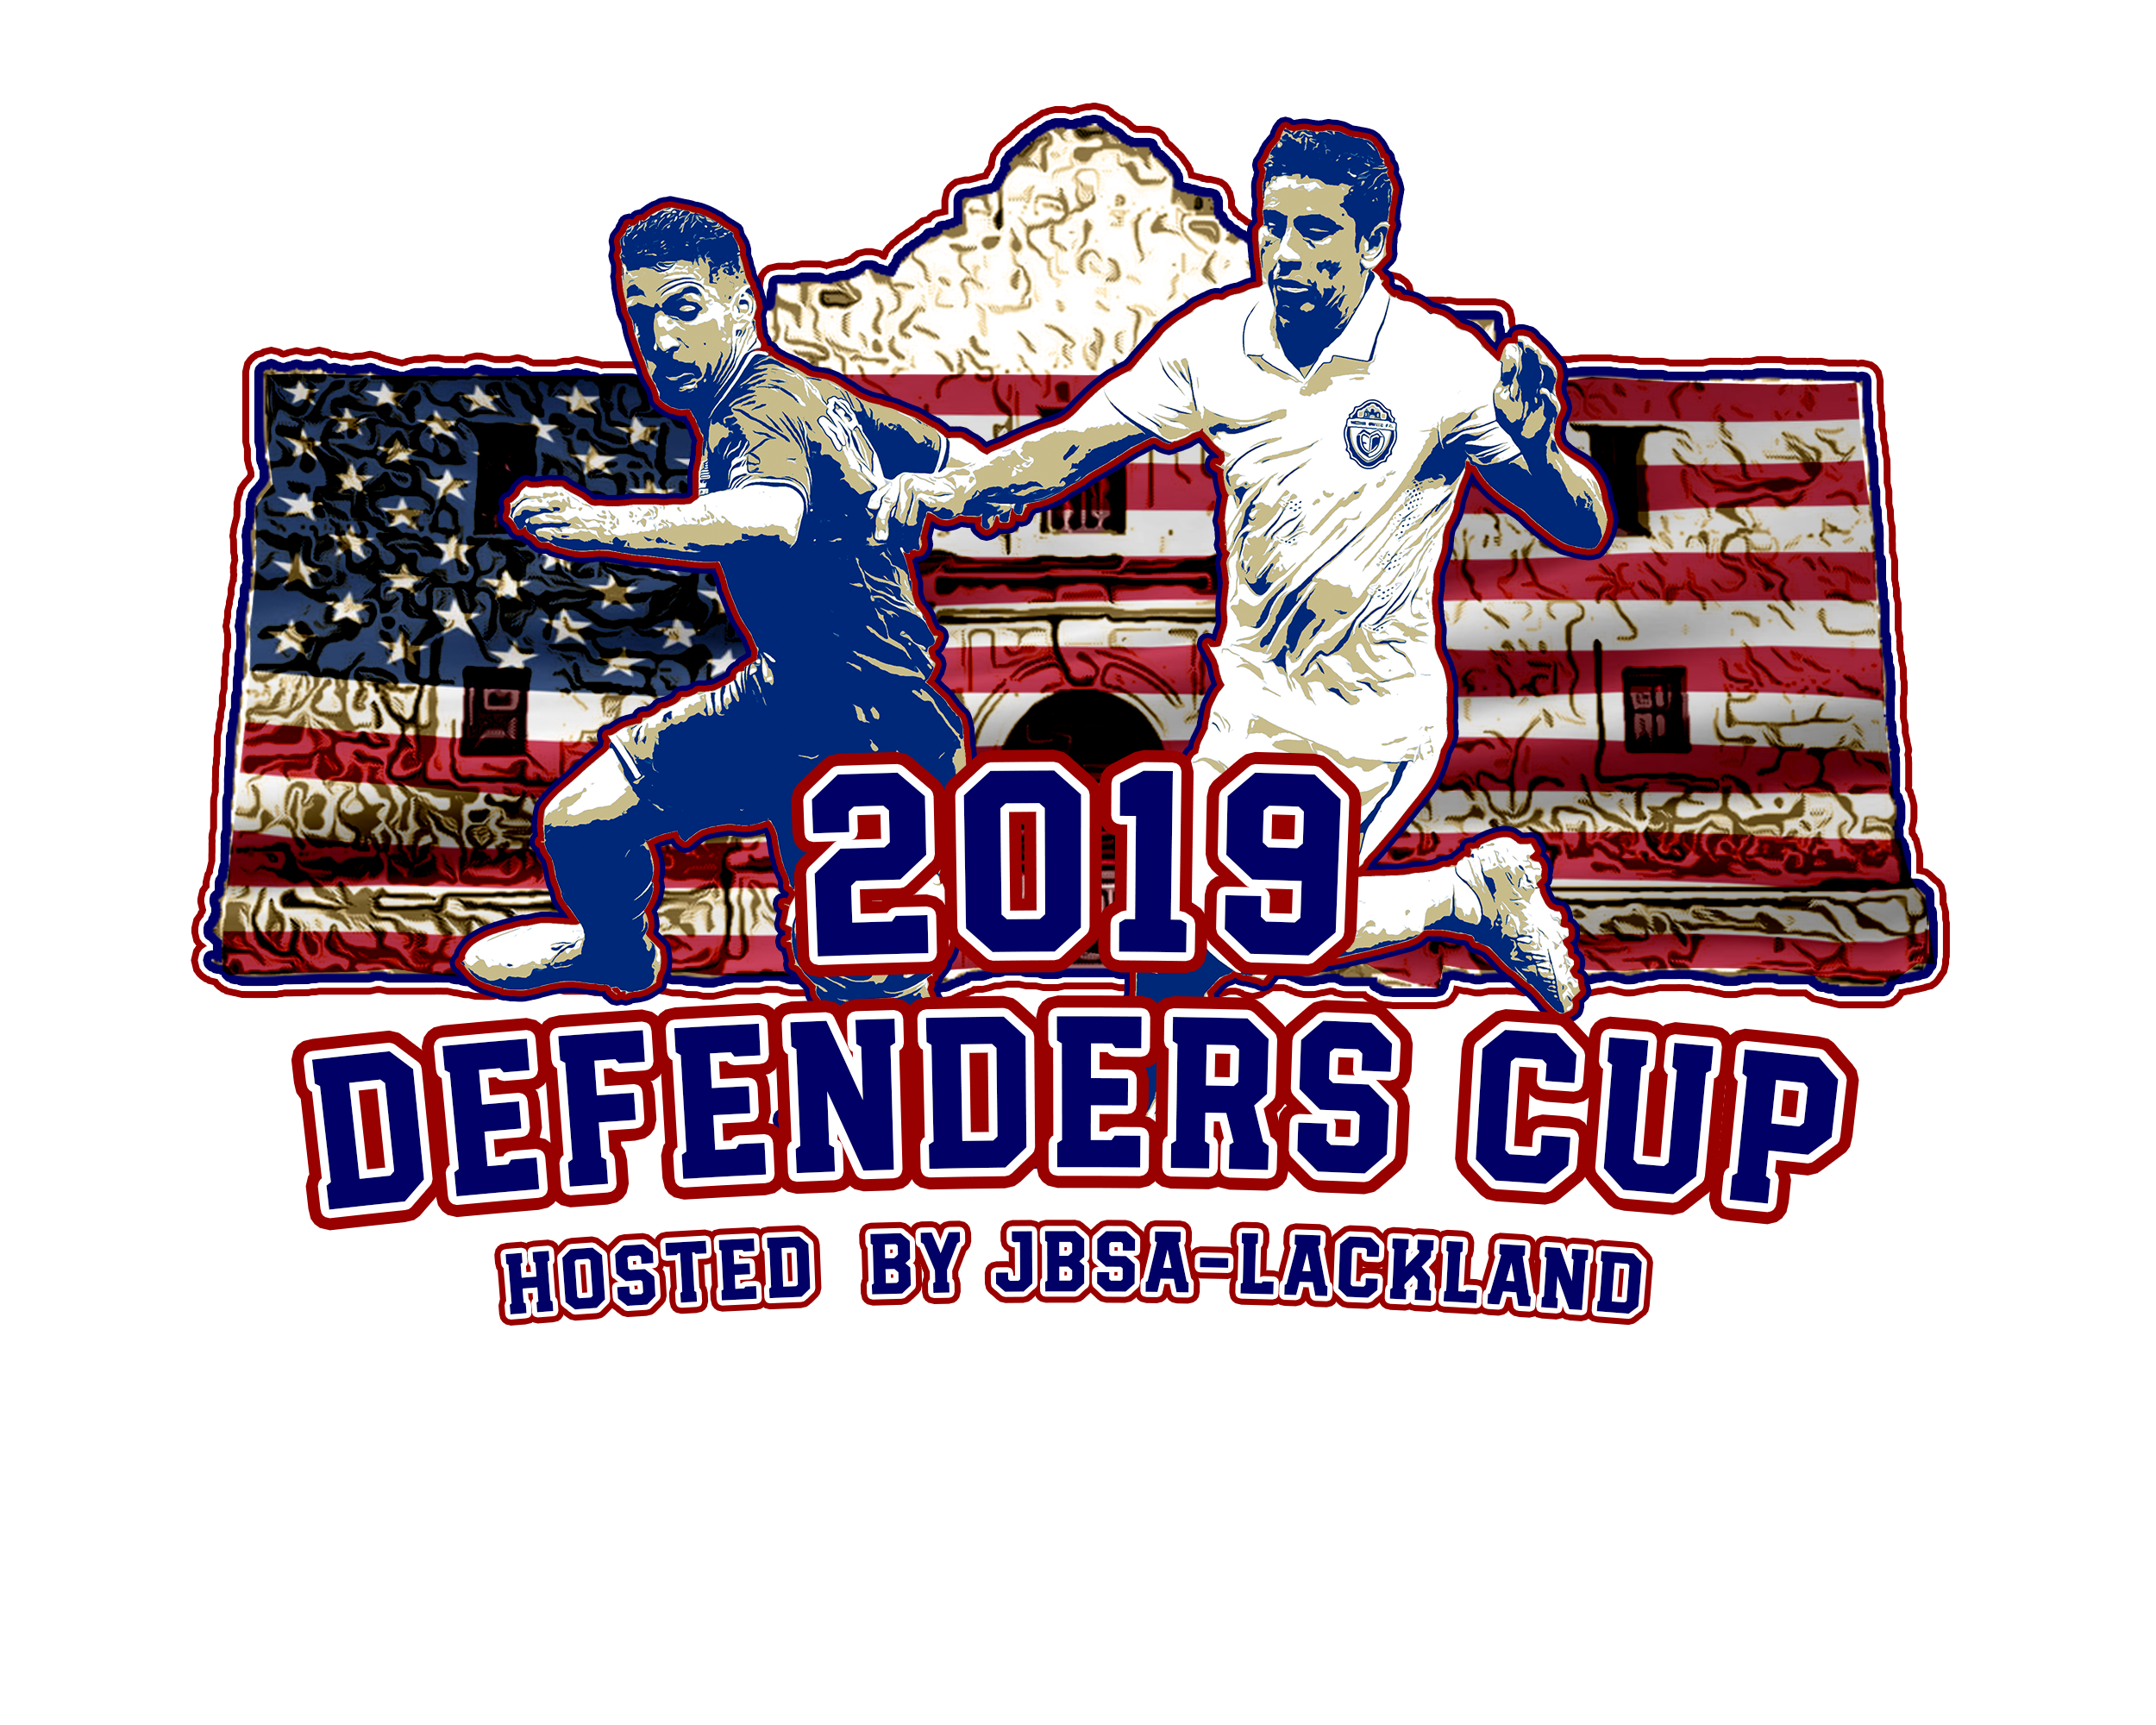 Defender's Cup National Military Soccer Tournament Defender's Cup